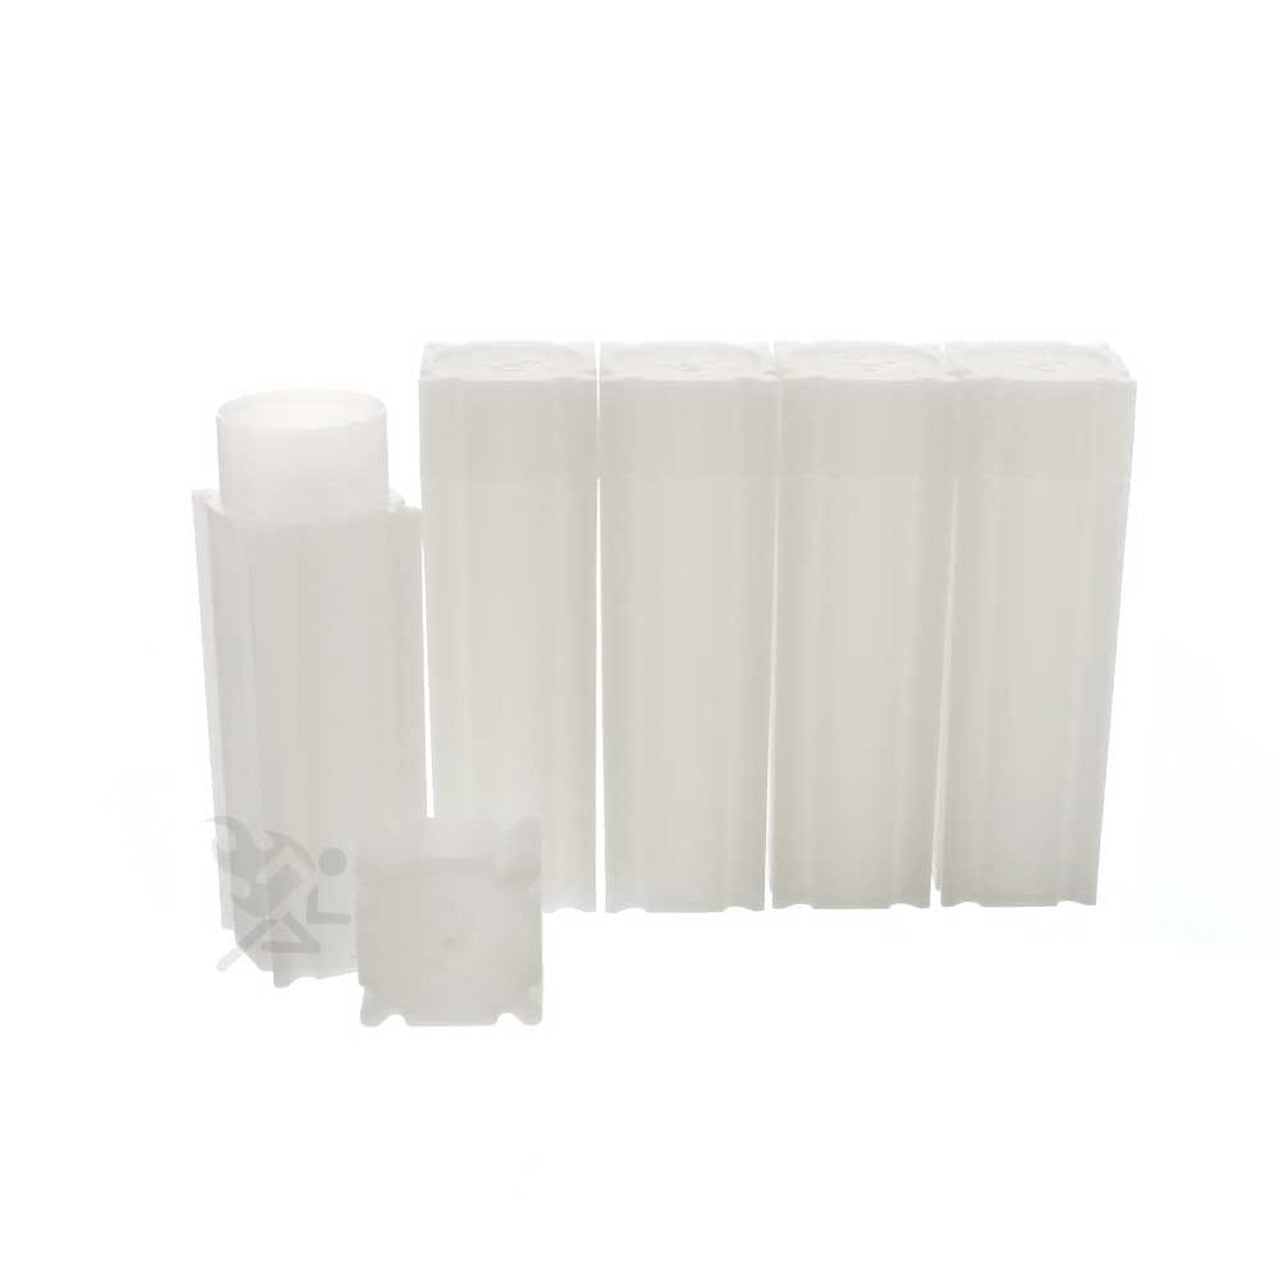 Square Coin Storage Tubes for Nickels